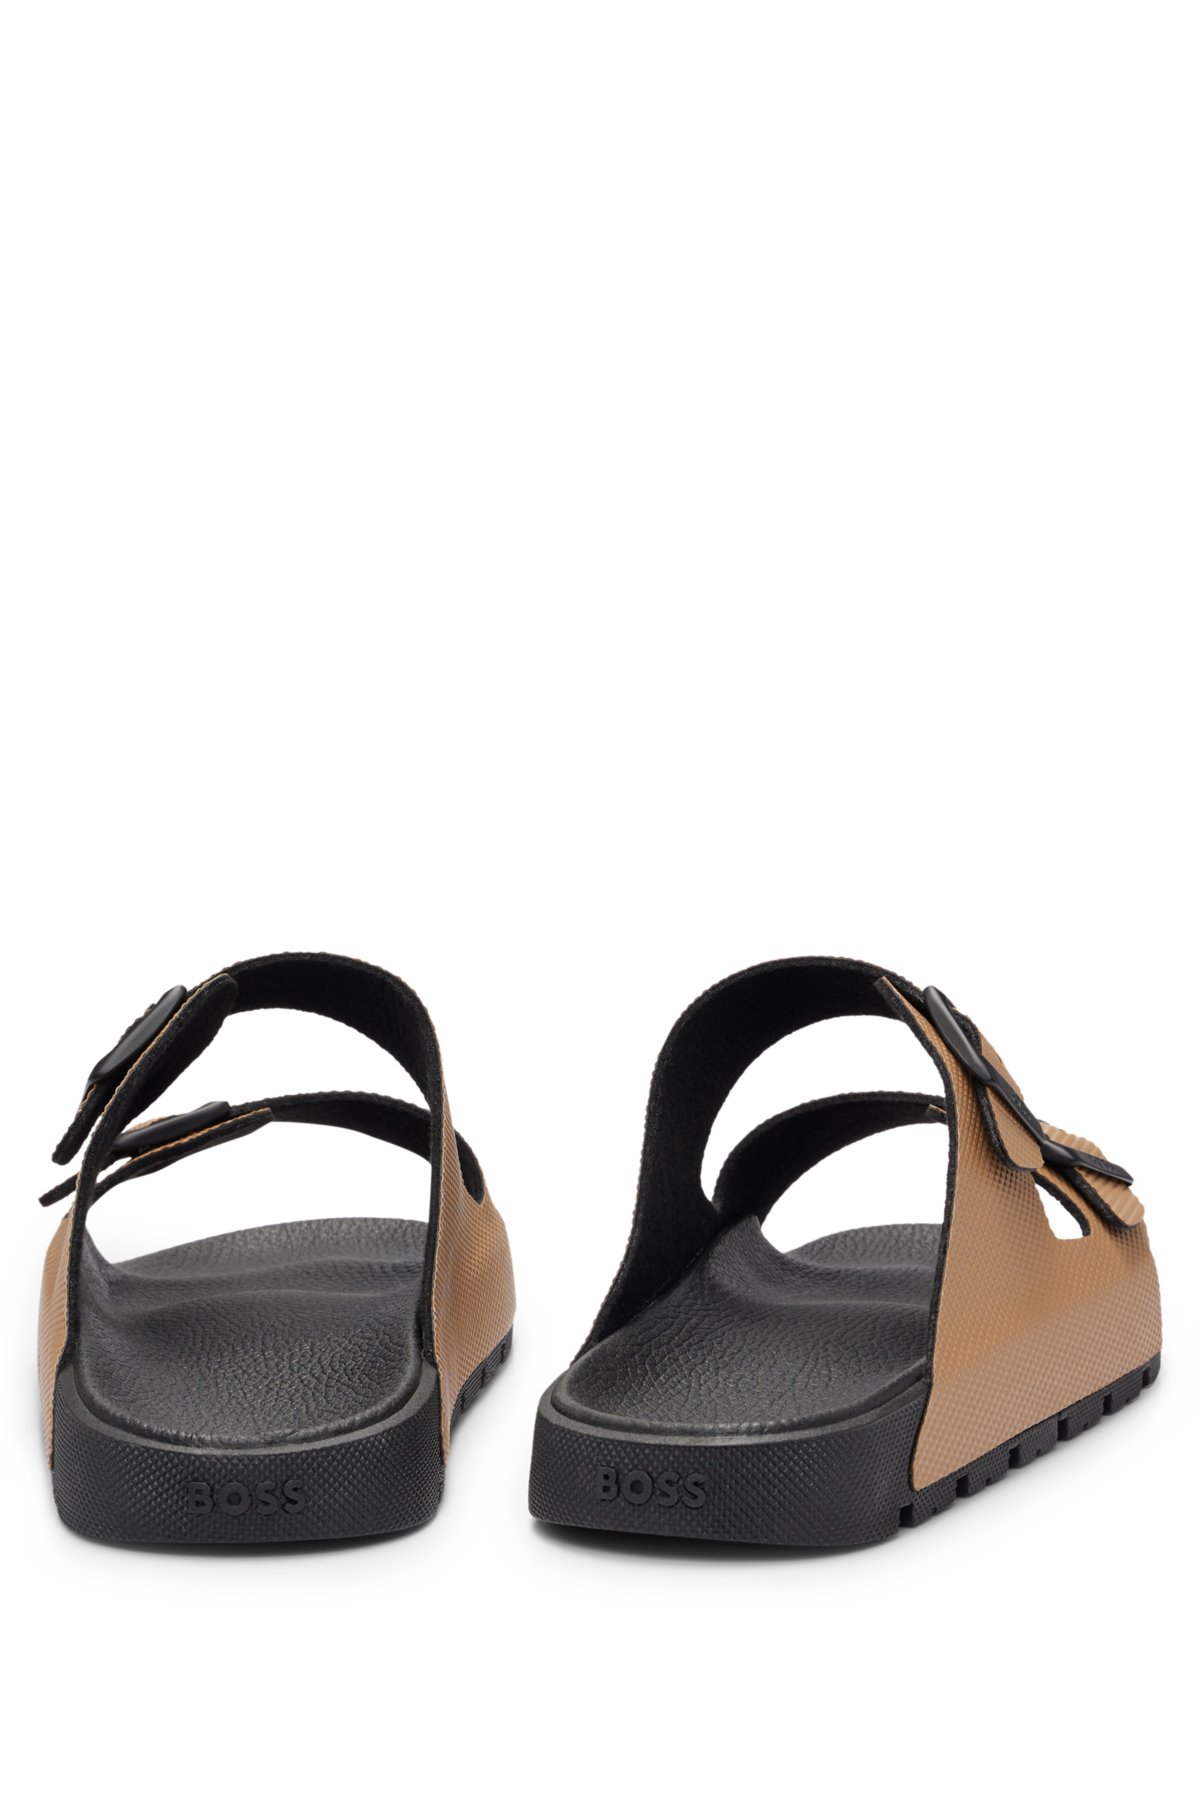 All-gender twin-strap sandals with structured uppers, Light Beige